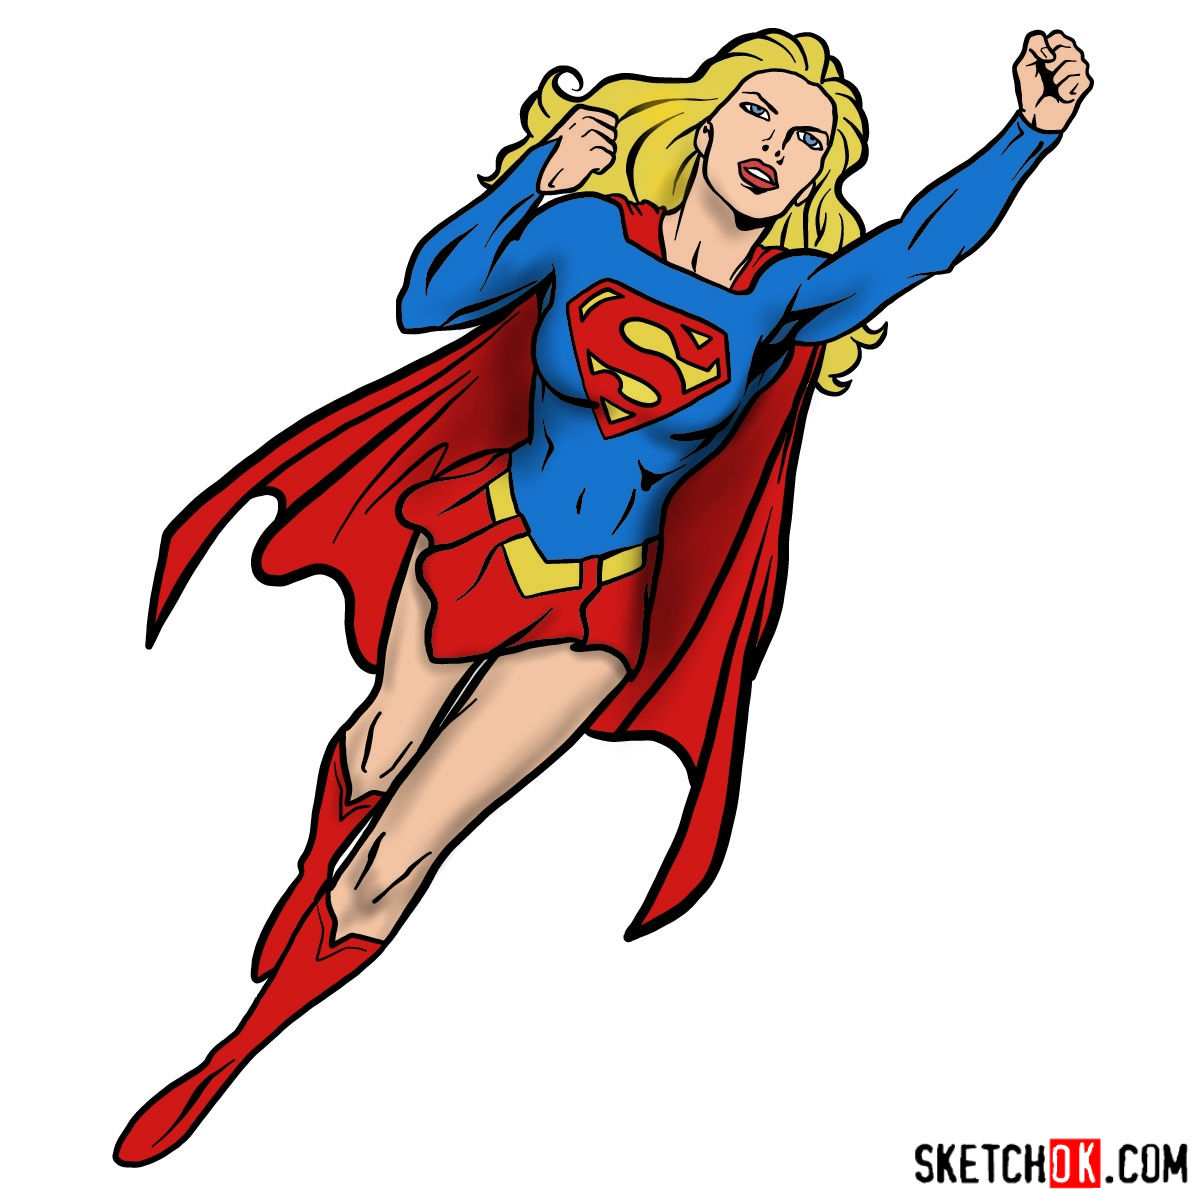 How to draw Supergirl in flight - Sketchok easy drawing guides